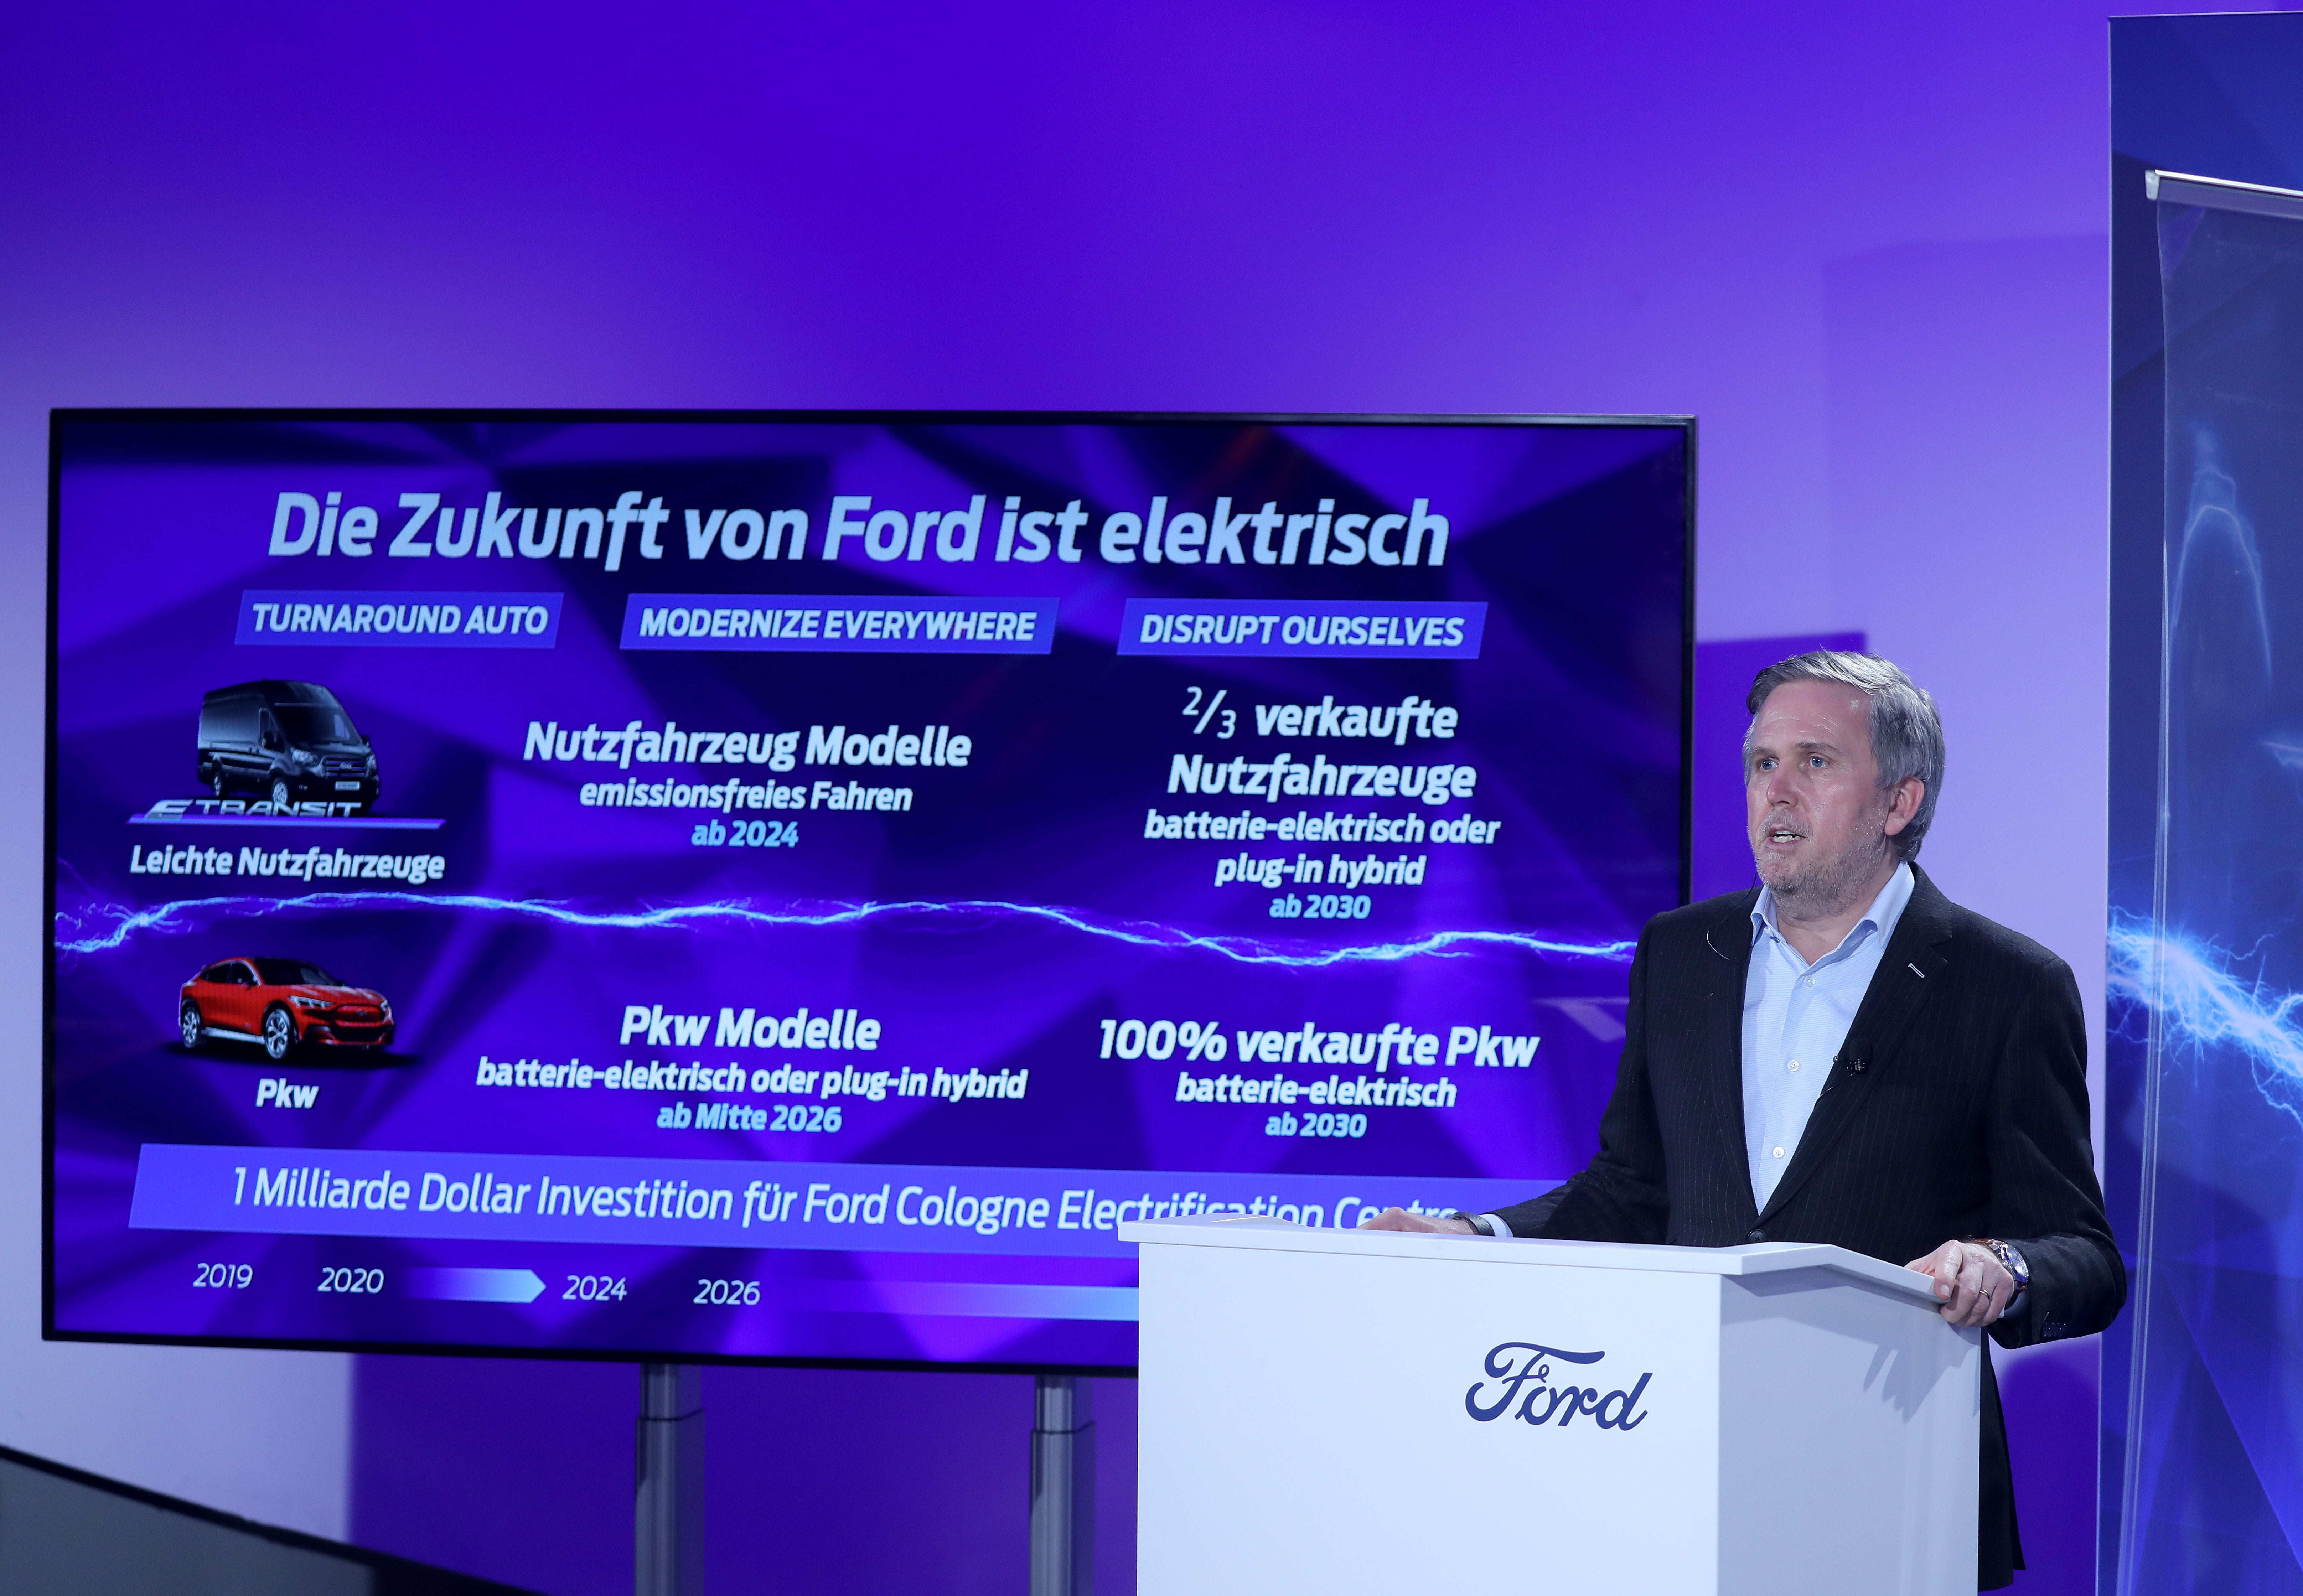 Stuart Rowley, president of Ford Europe, speaks during a press conference at car maker Ford's plant in Cologne